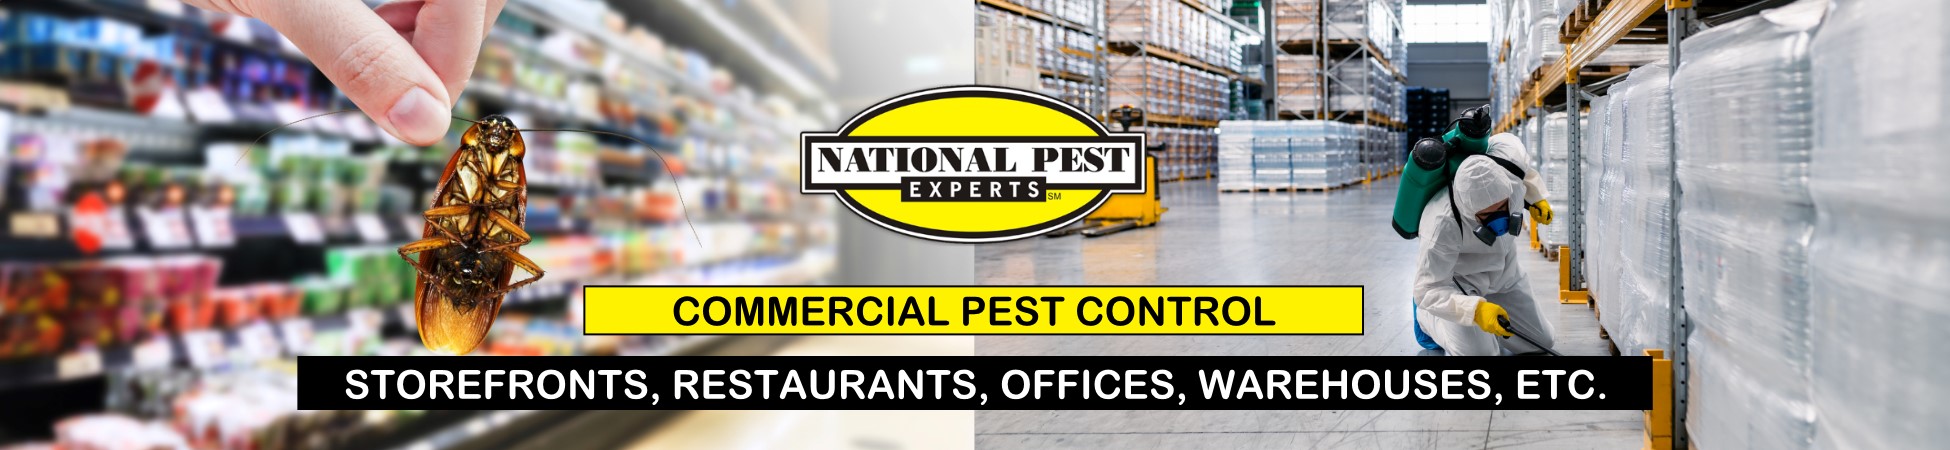 National Pest Experts - Commercial & Industrial exterminating and pest control in Levittown, NY